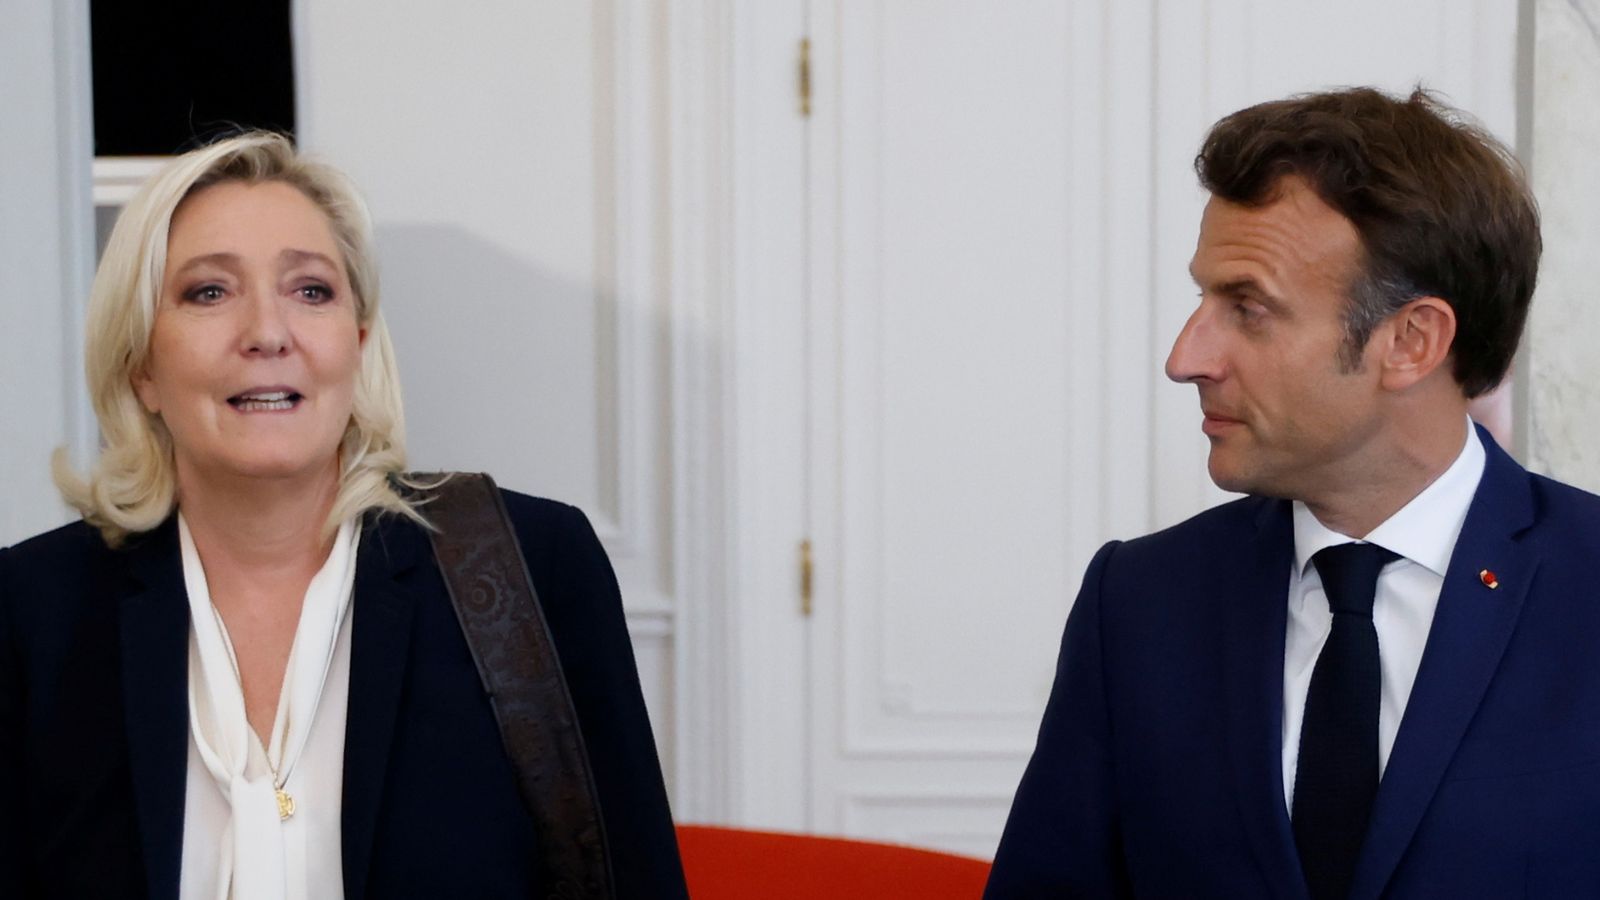 France election: Marine Le Pen on the brink of power, as Emmanuel Macron's big gamble looks set to fail